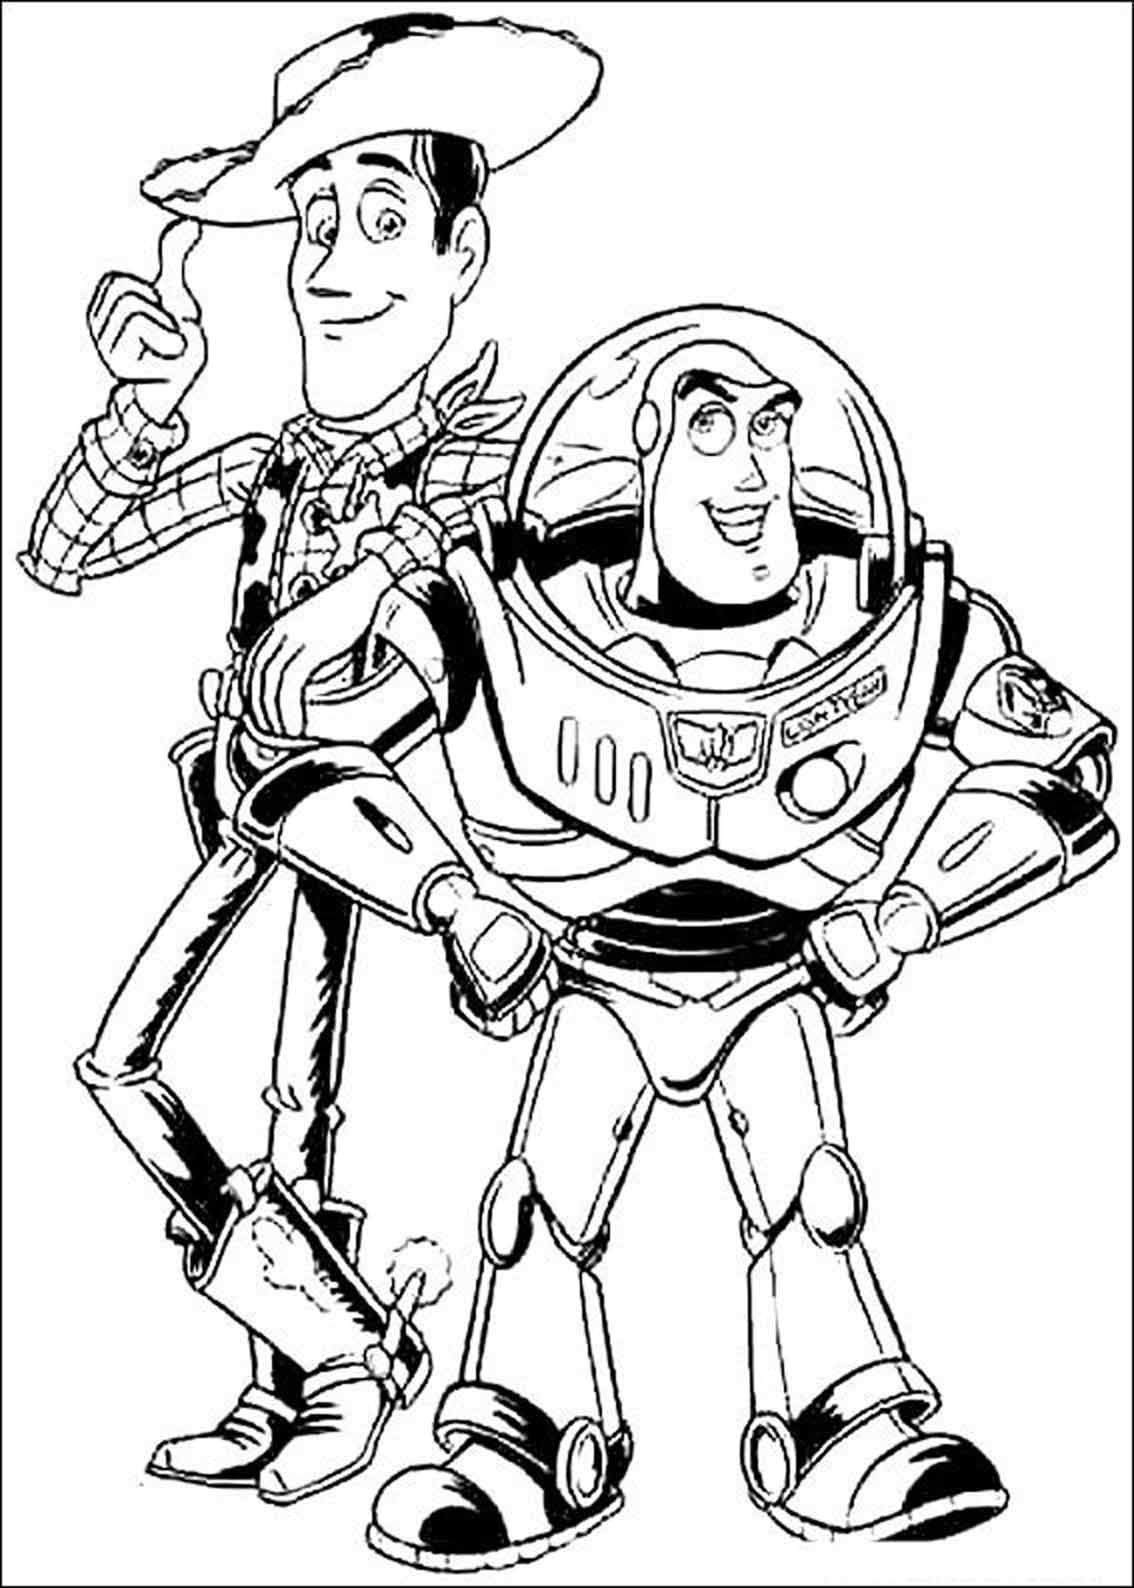 Beautiful Toy Story coloring page to print and color : Woody and Buzz Lightyear